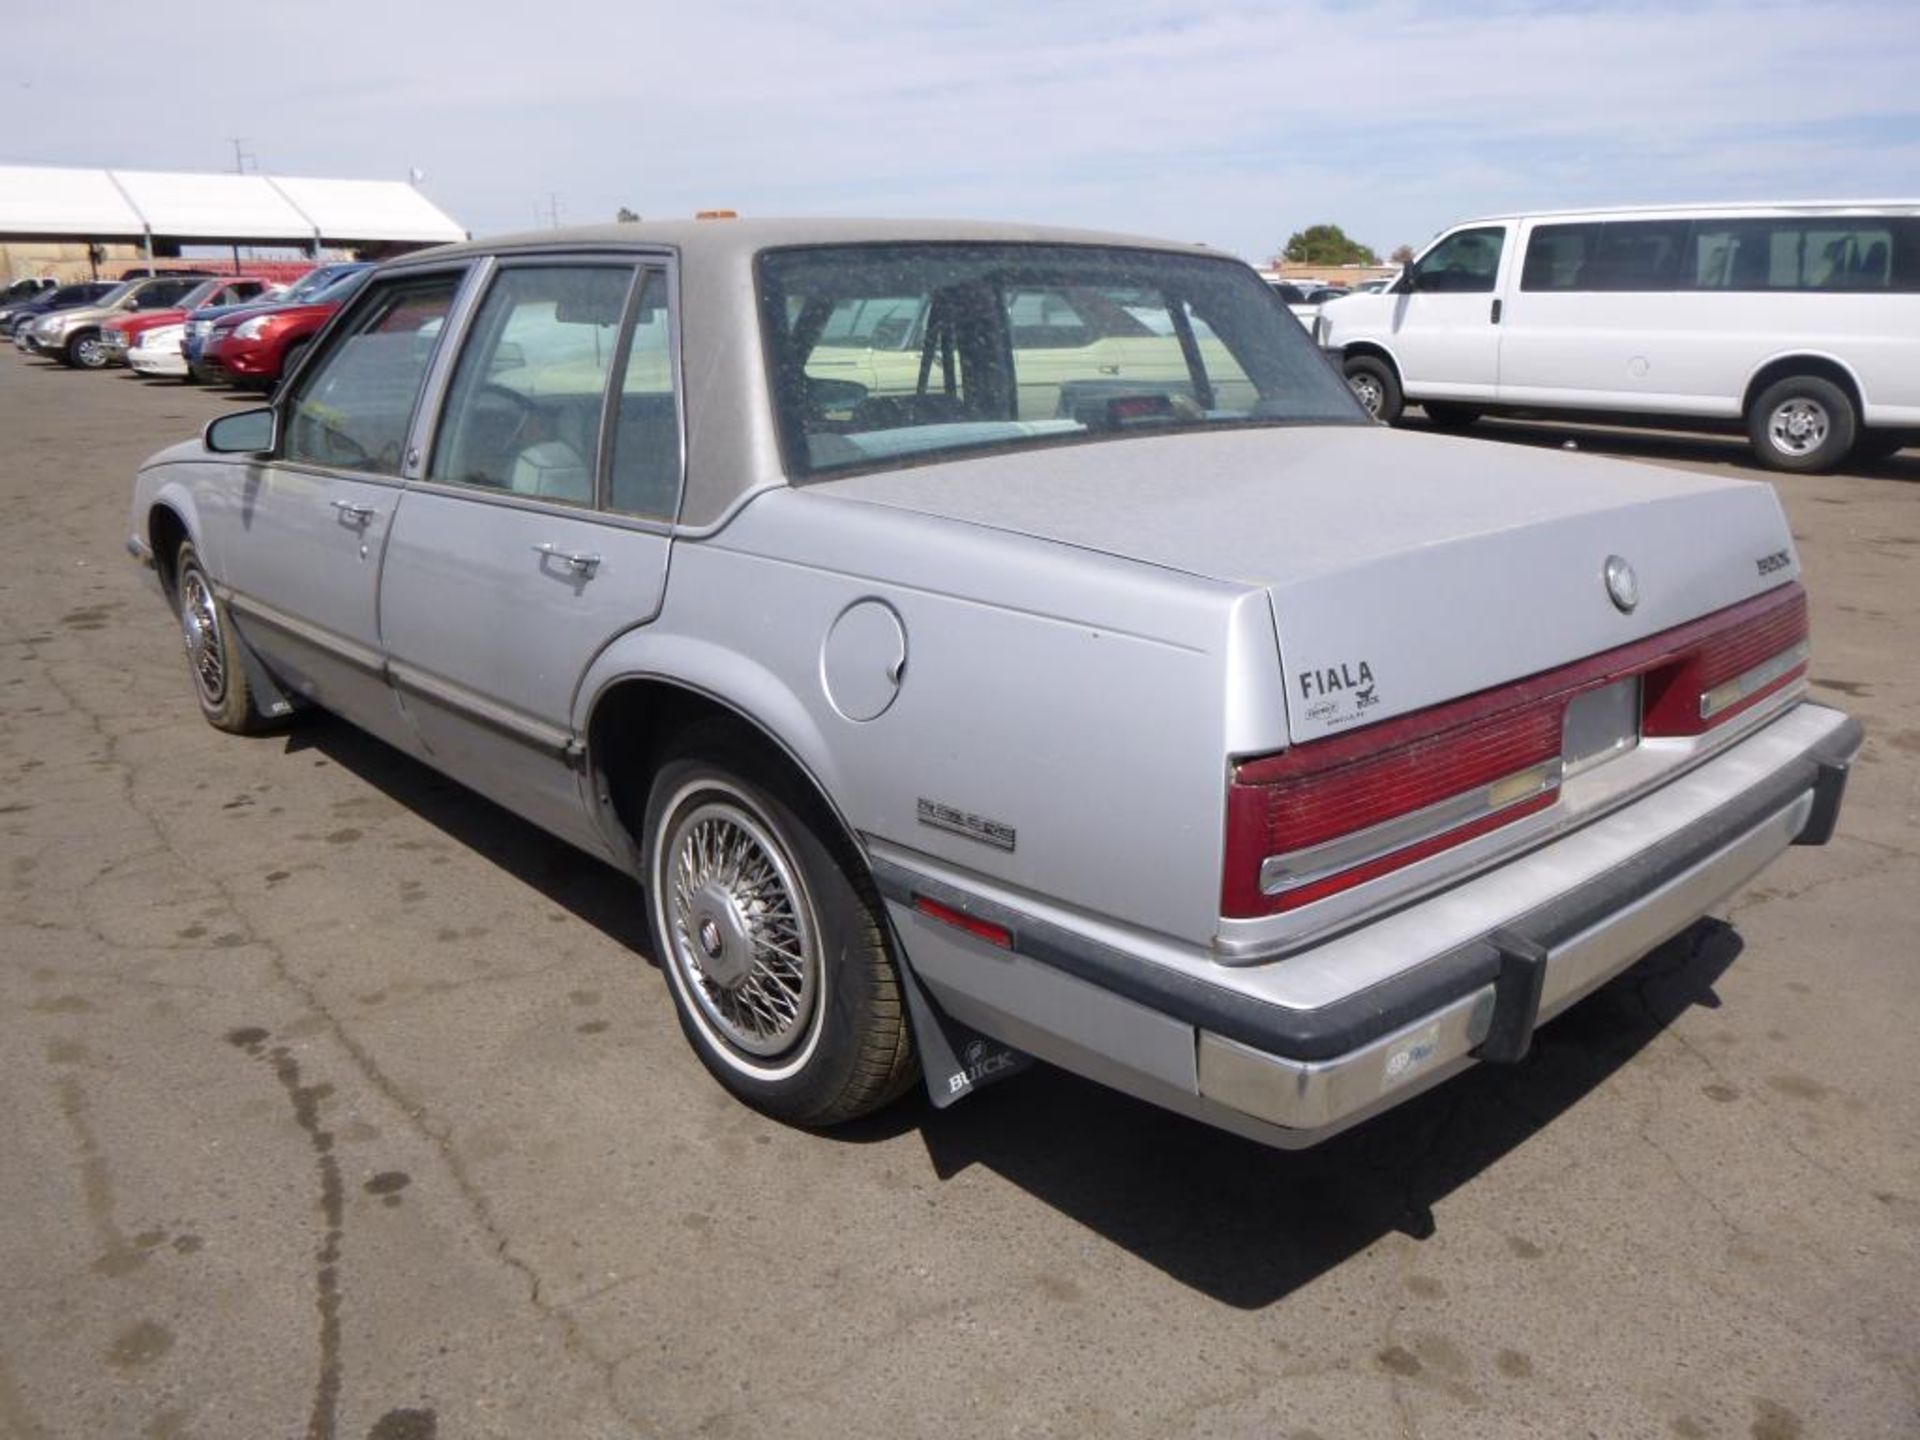 1990 Buick LeSabre - Image 2 of 15